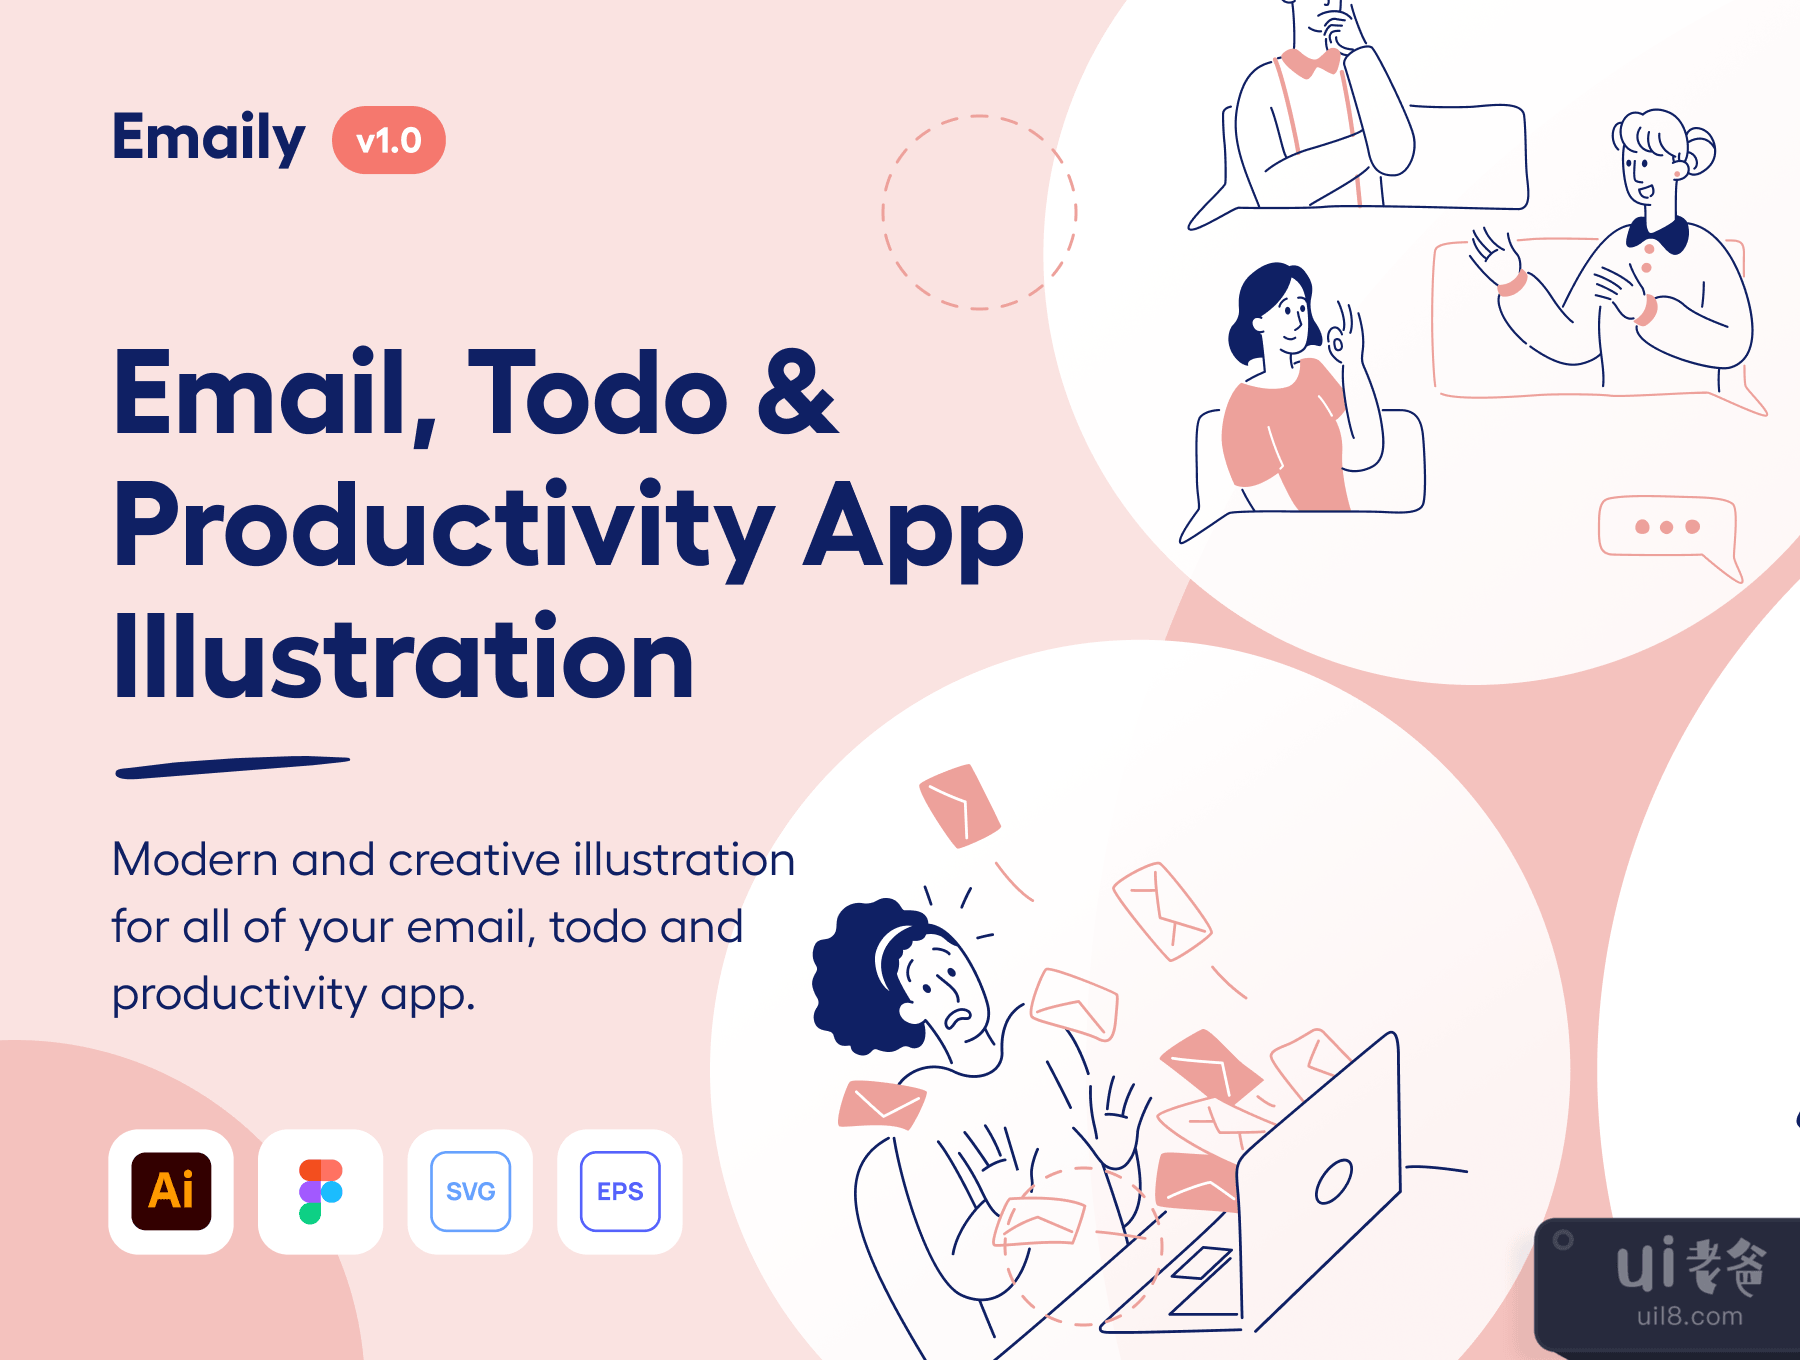 Emaily - 电子邮件、Todo和生产力图解 (Emaily - Email, Todo & Productivity Illustration)插图